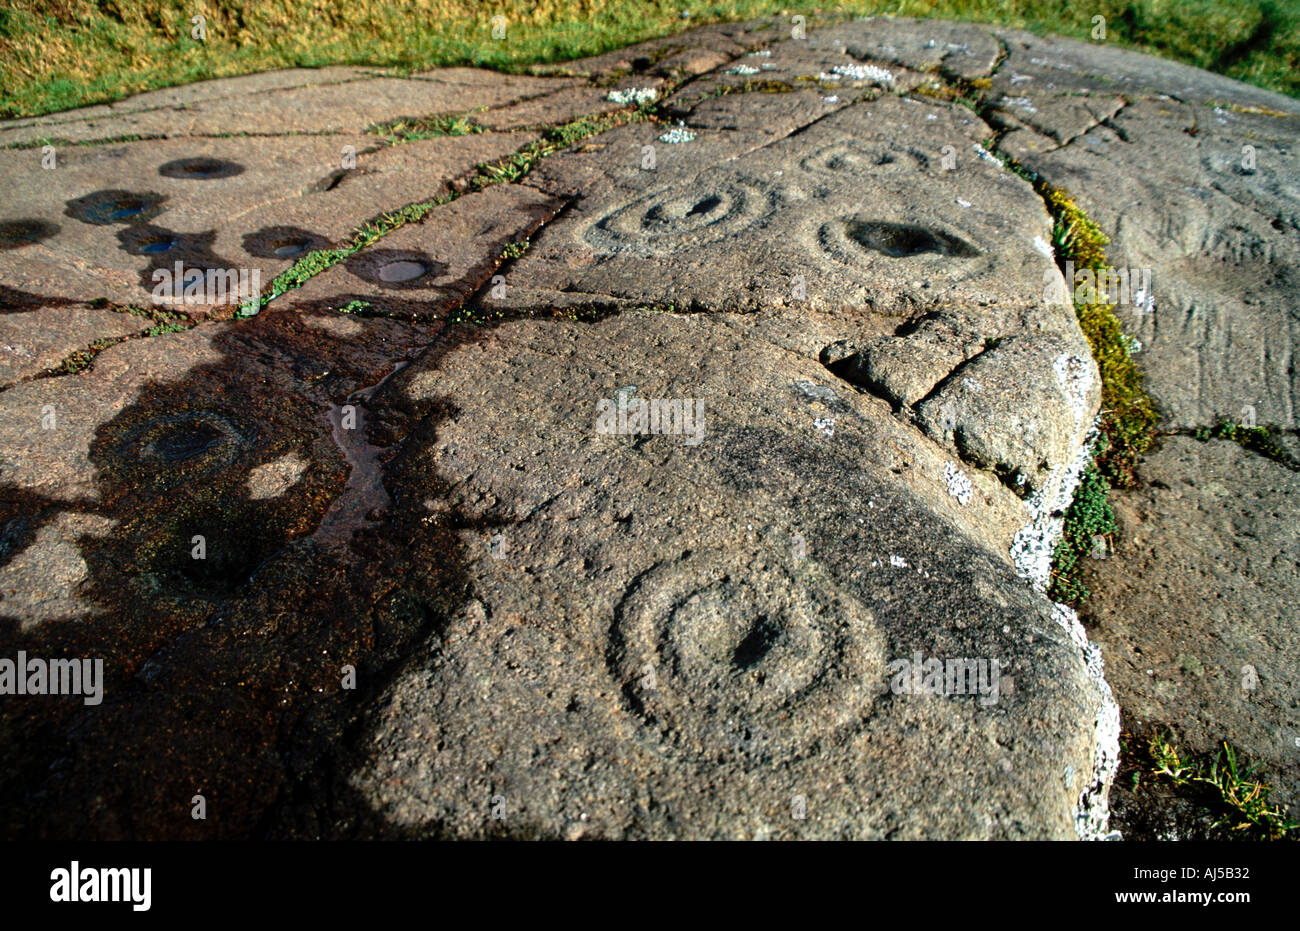 Baluachraig carvings cup and ring markings Stock Photo